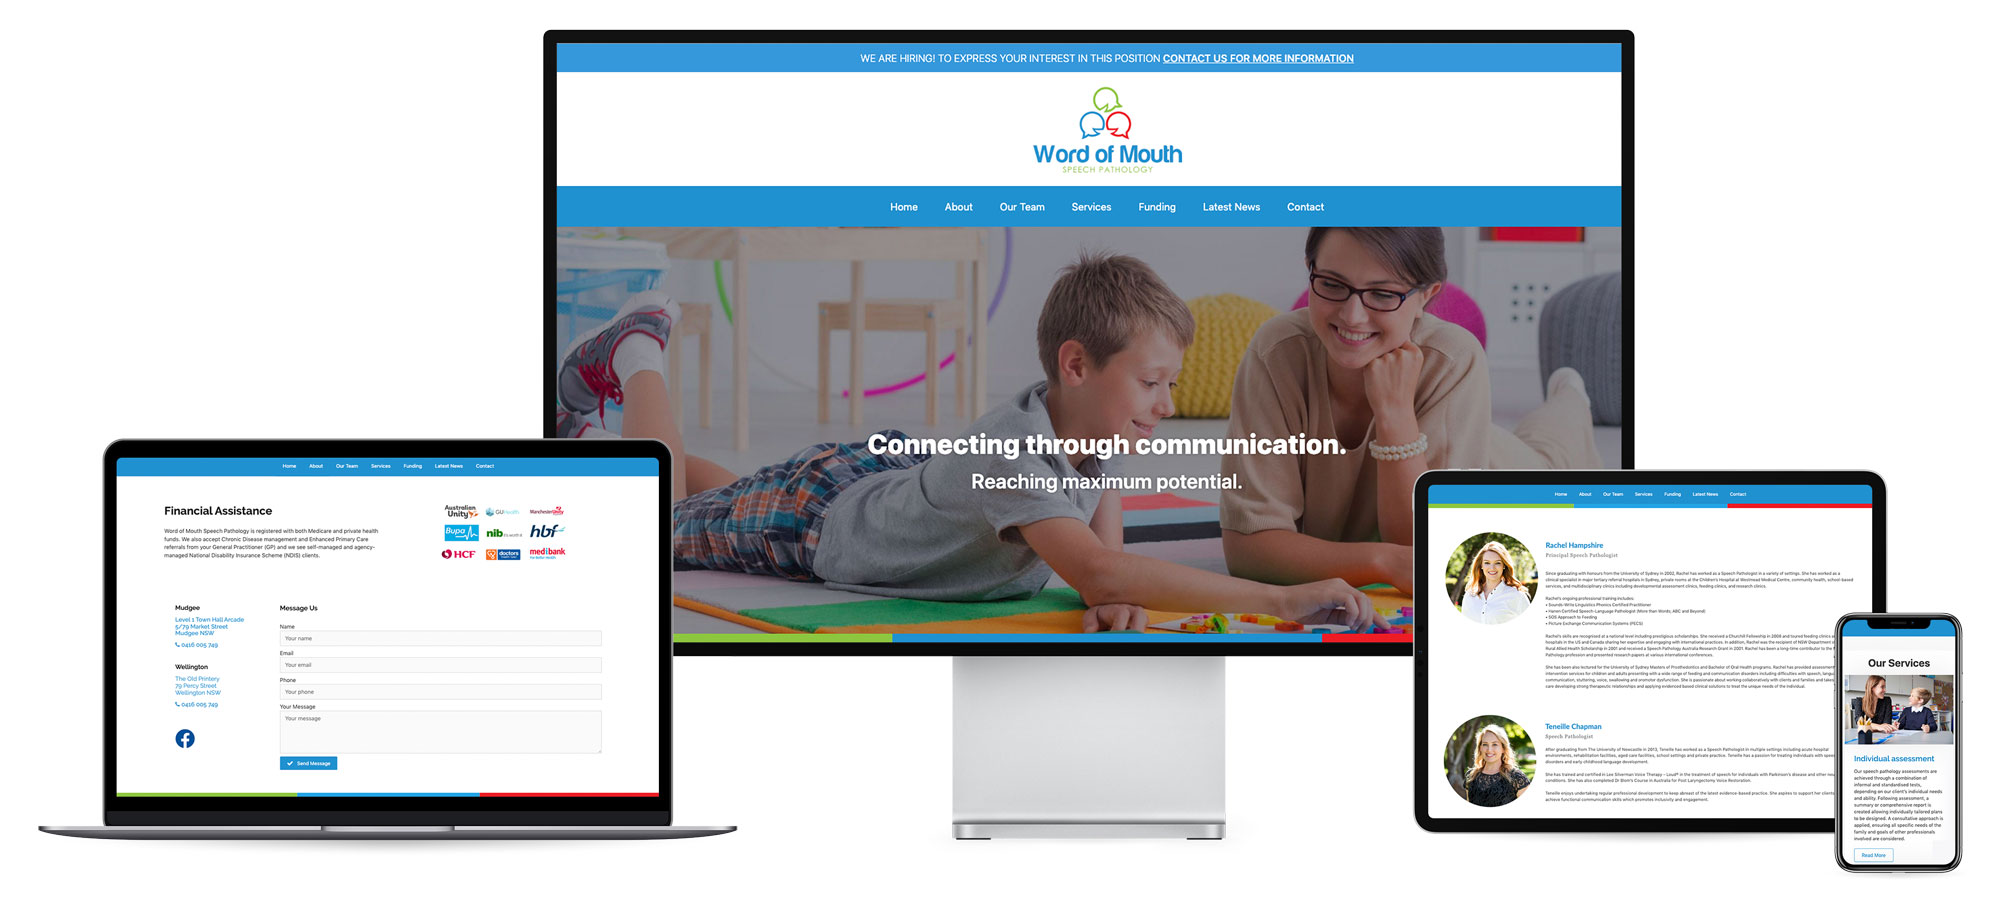 Word of Mouth website on desktop, laptop, tablet and smart phone devices